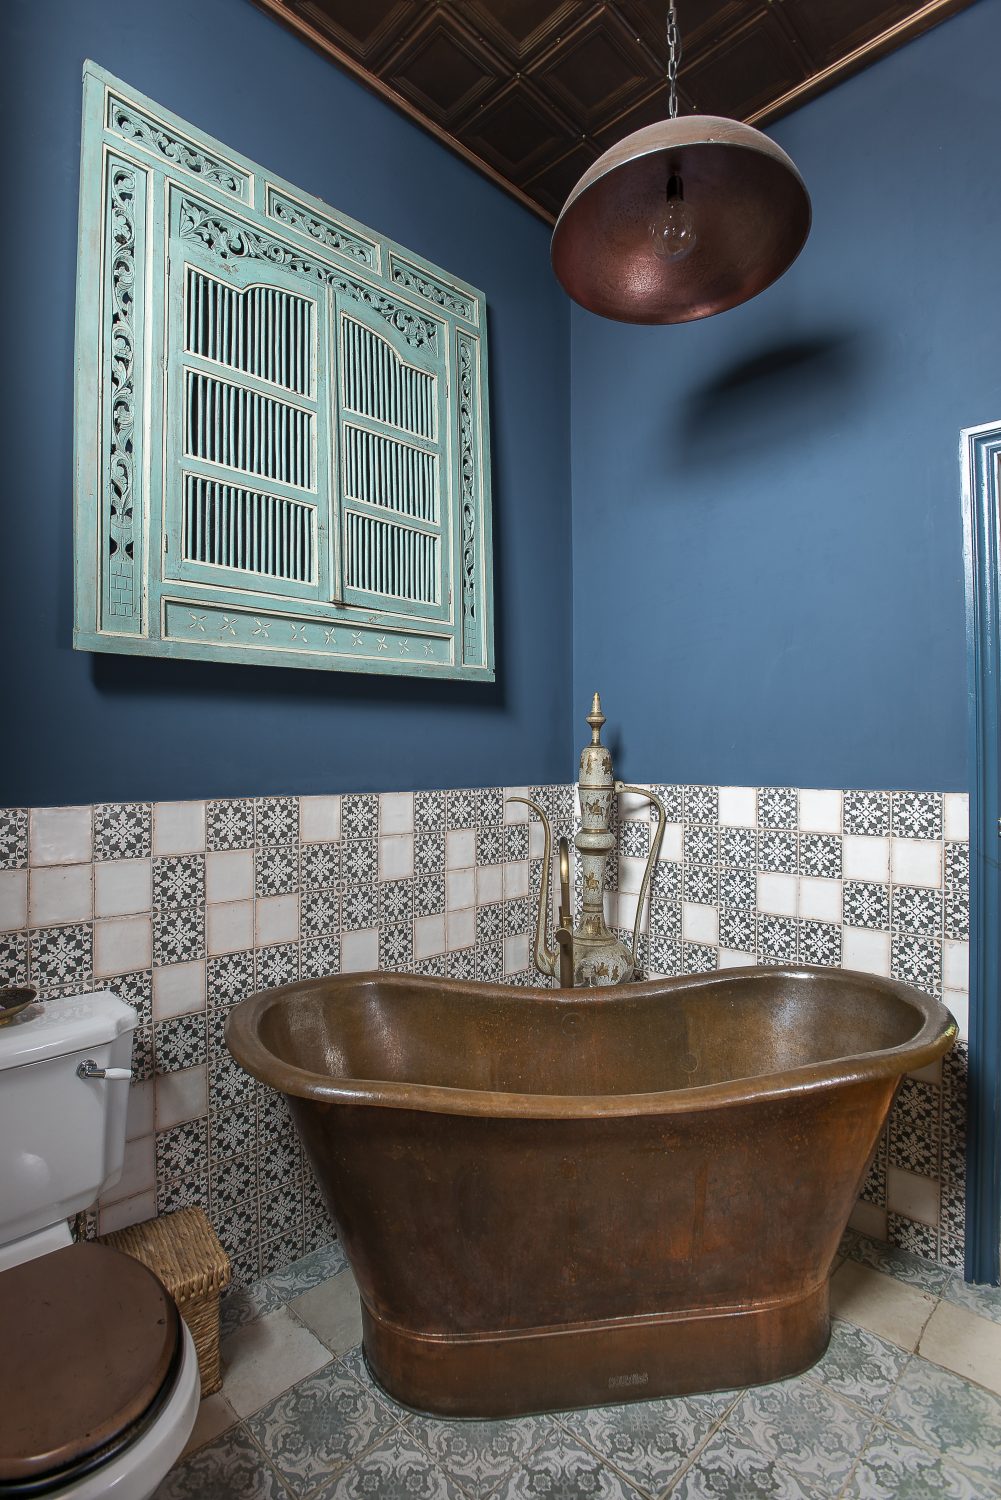 Laurie sourced the copper bath in the Turkish-bath inspired guest bathroom directly from the makers in Morocco